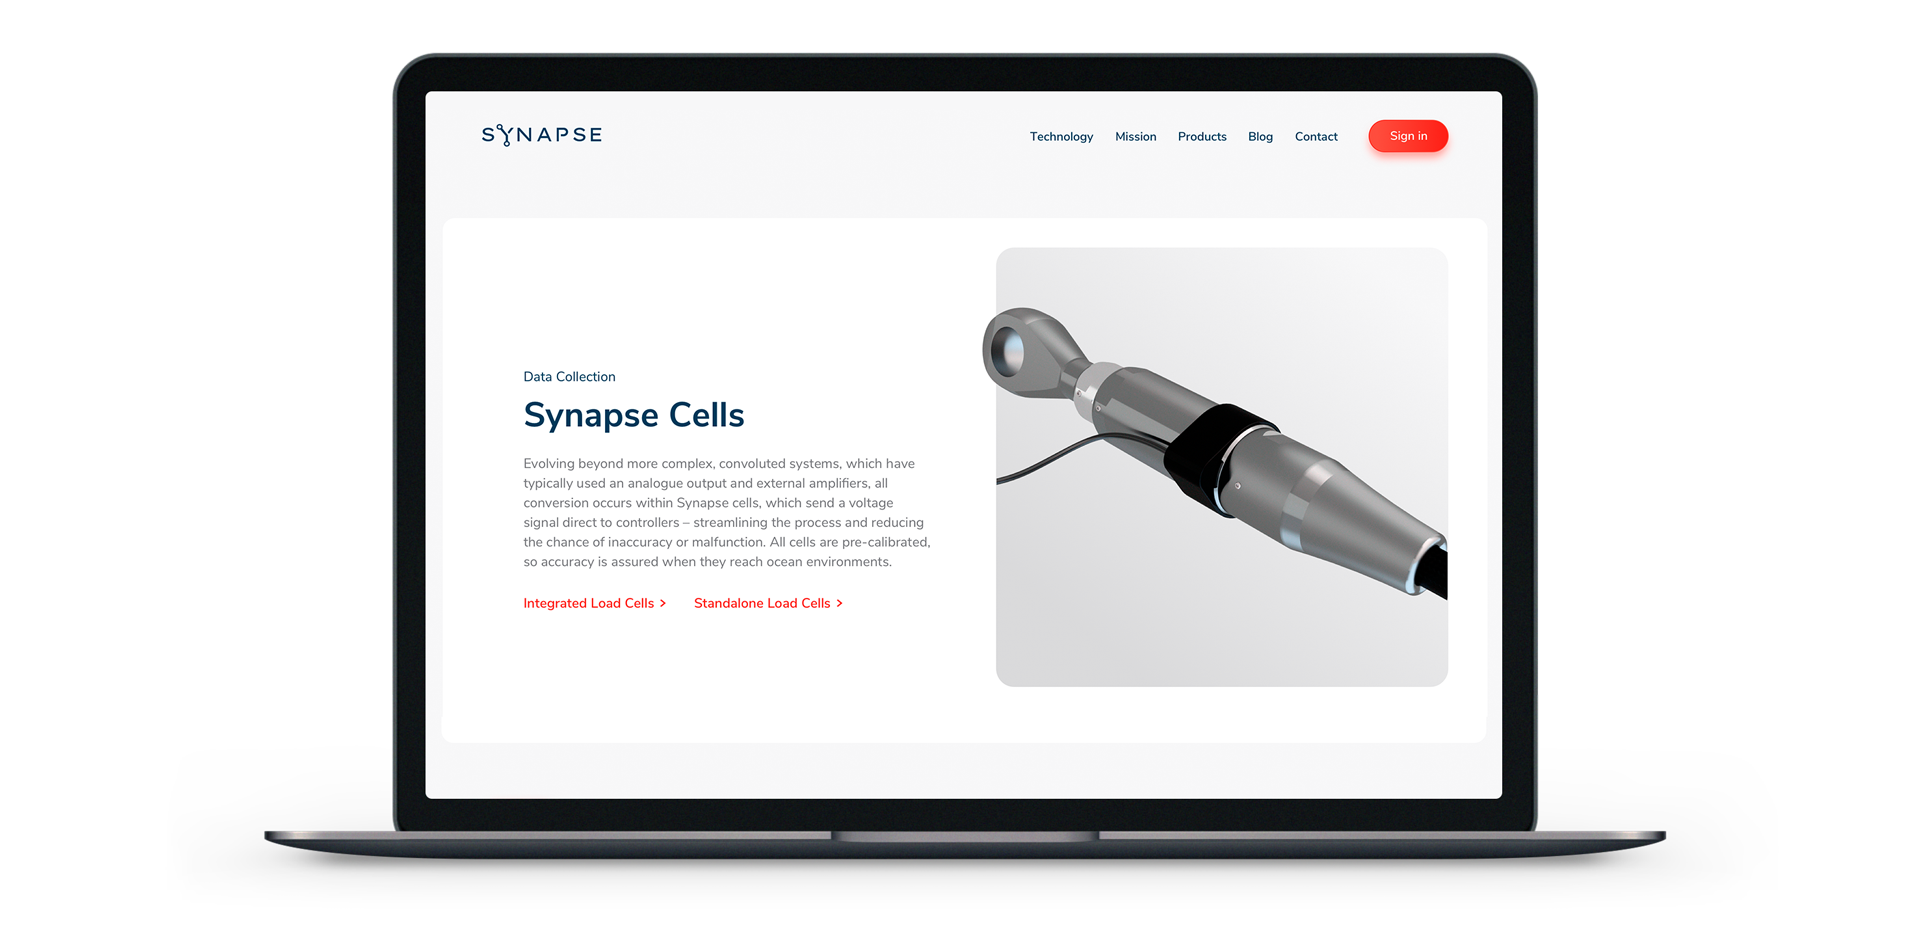 We launched the new Synapse website, the development of leading innovation products in the marine industry.